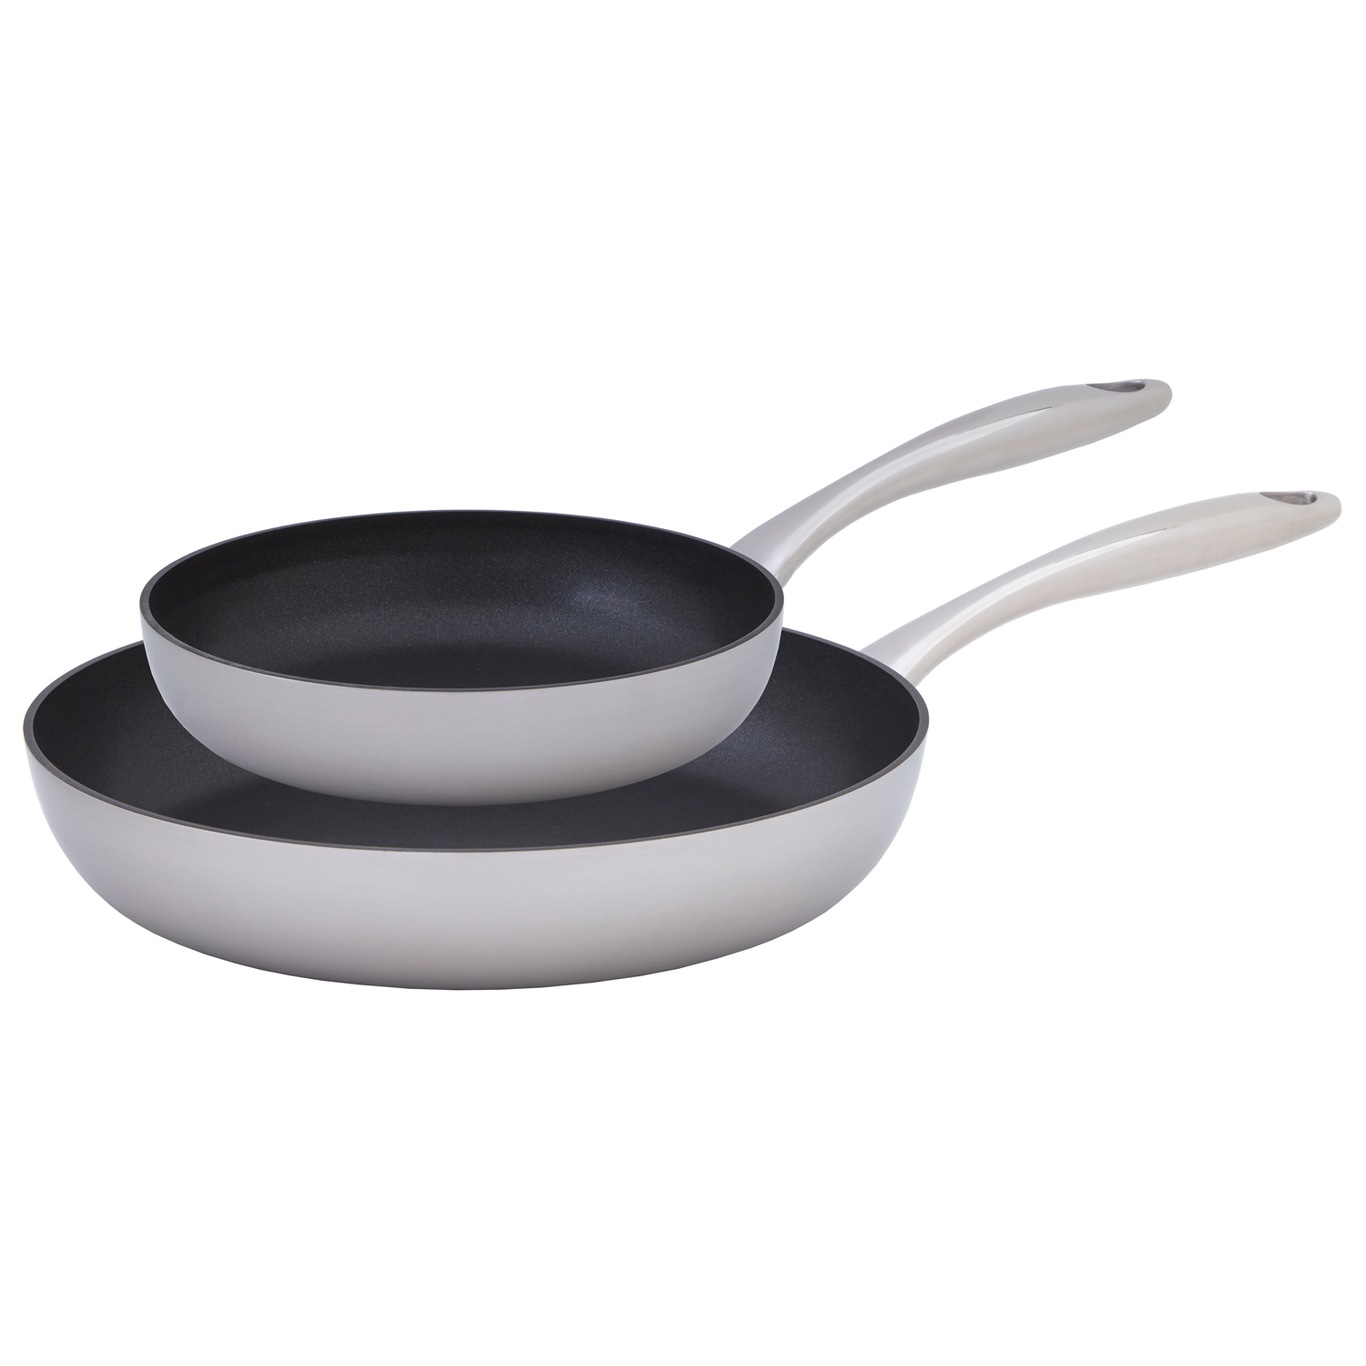 https://royaldesign.com/image/2/culimat-frying-pans-set-with-tongs-0?w=800&quality=80